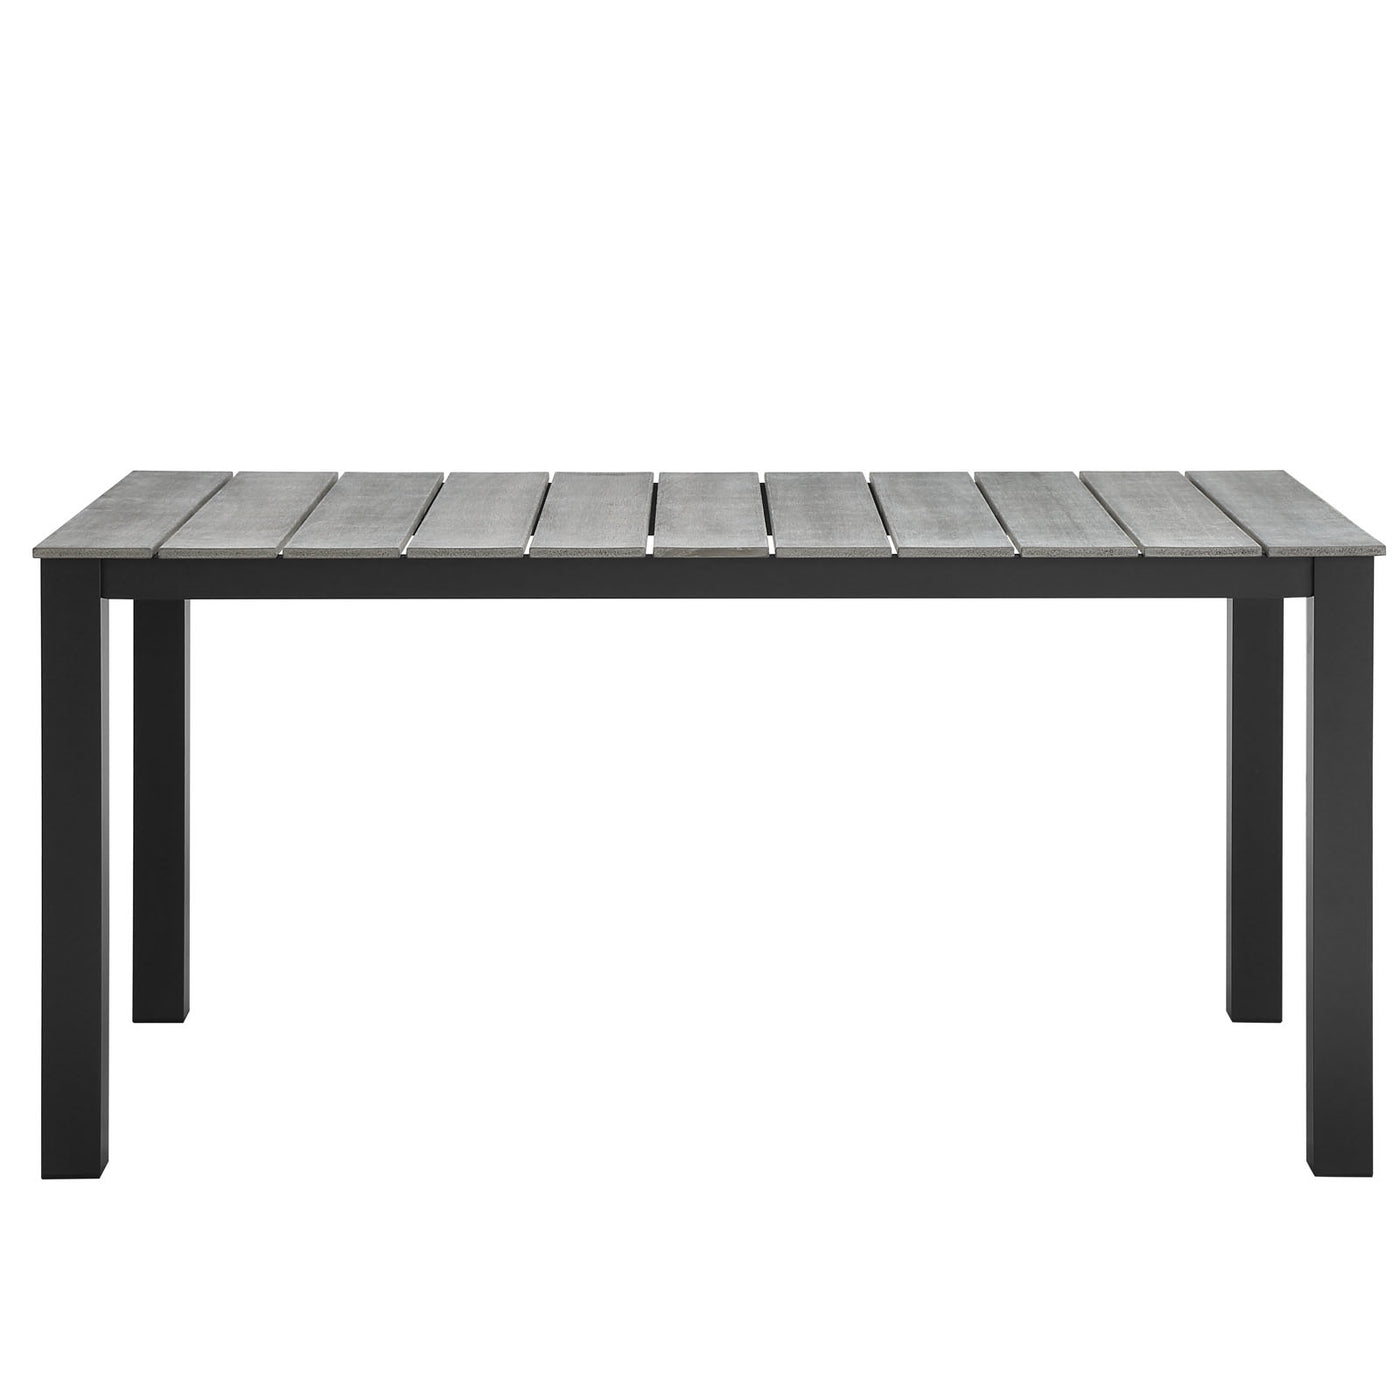 Maine 63" Outdoor Patio Dining Table